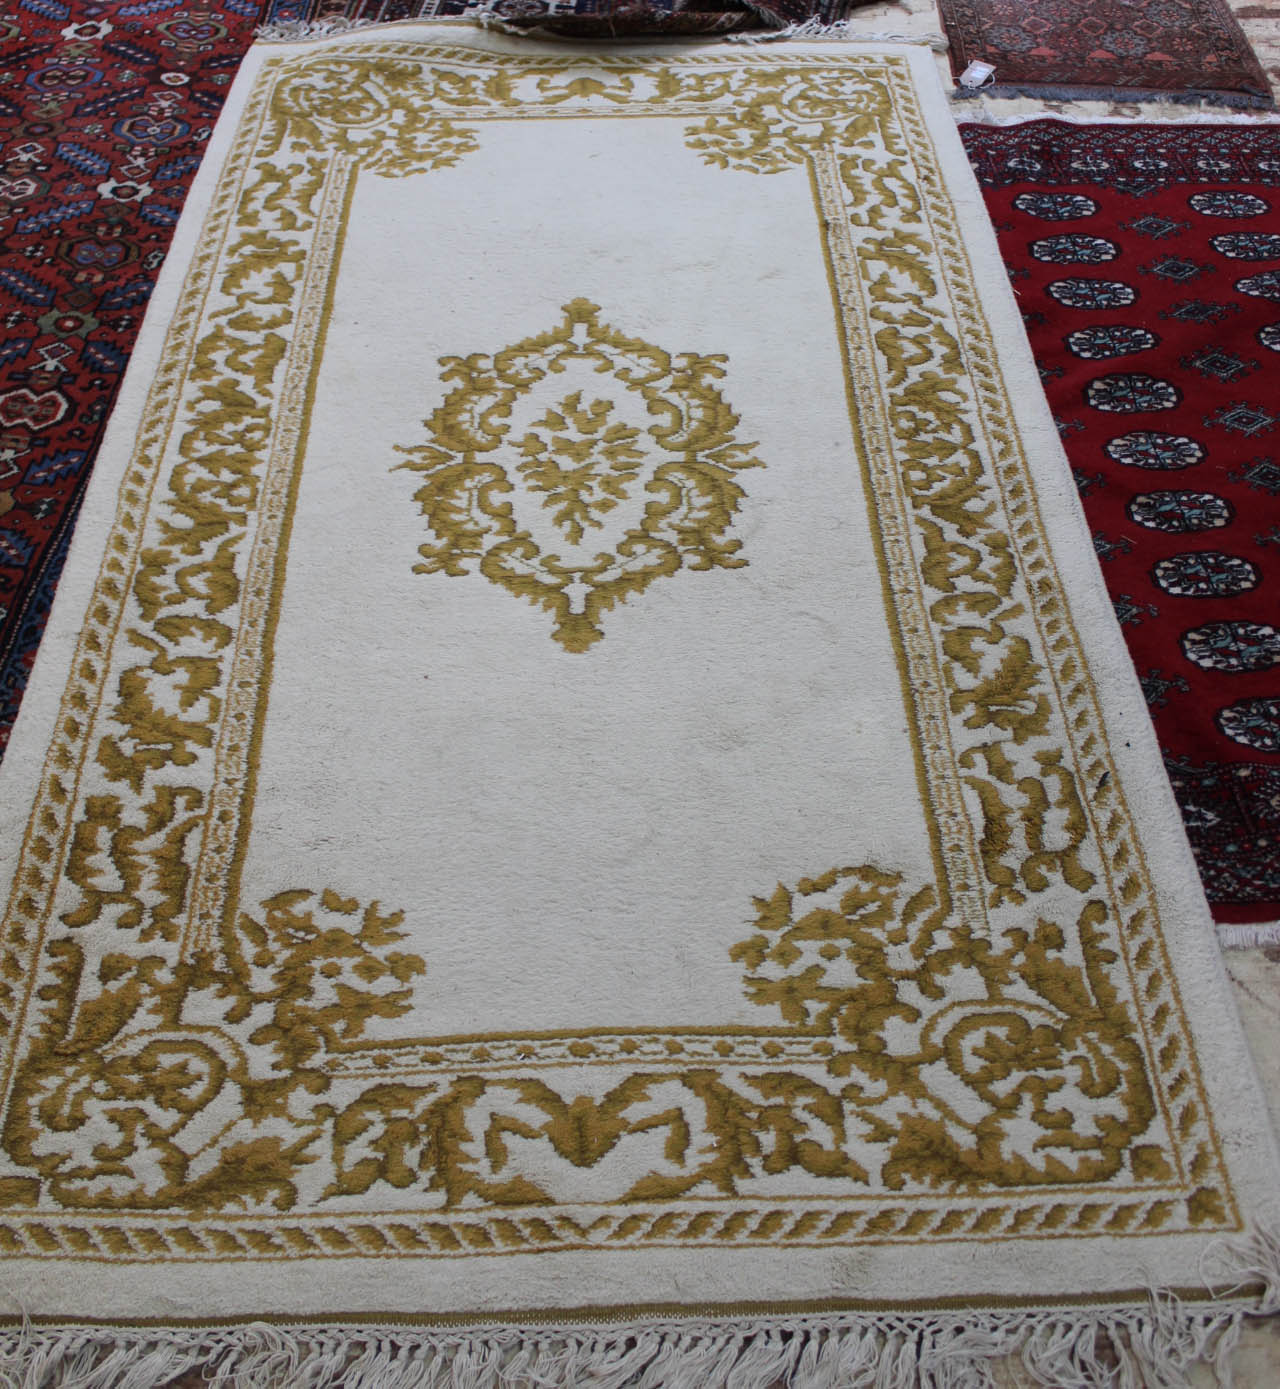 An Indian yellow floral rug,